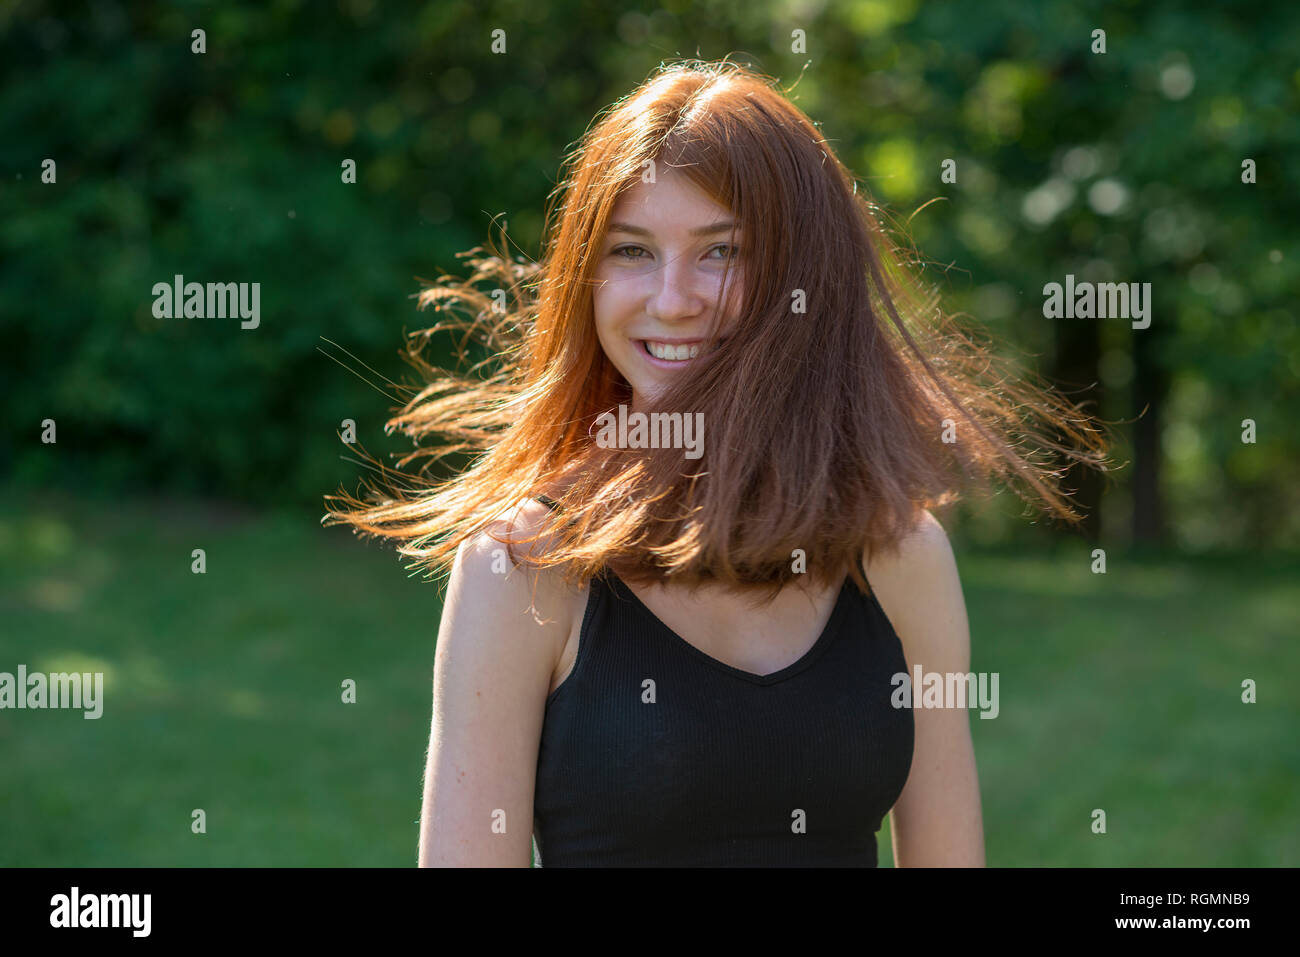 Portrait of redheaded teenage girl tossing her hair Stock Photo